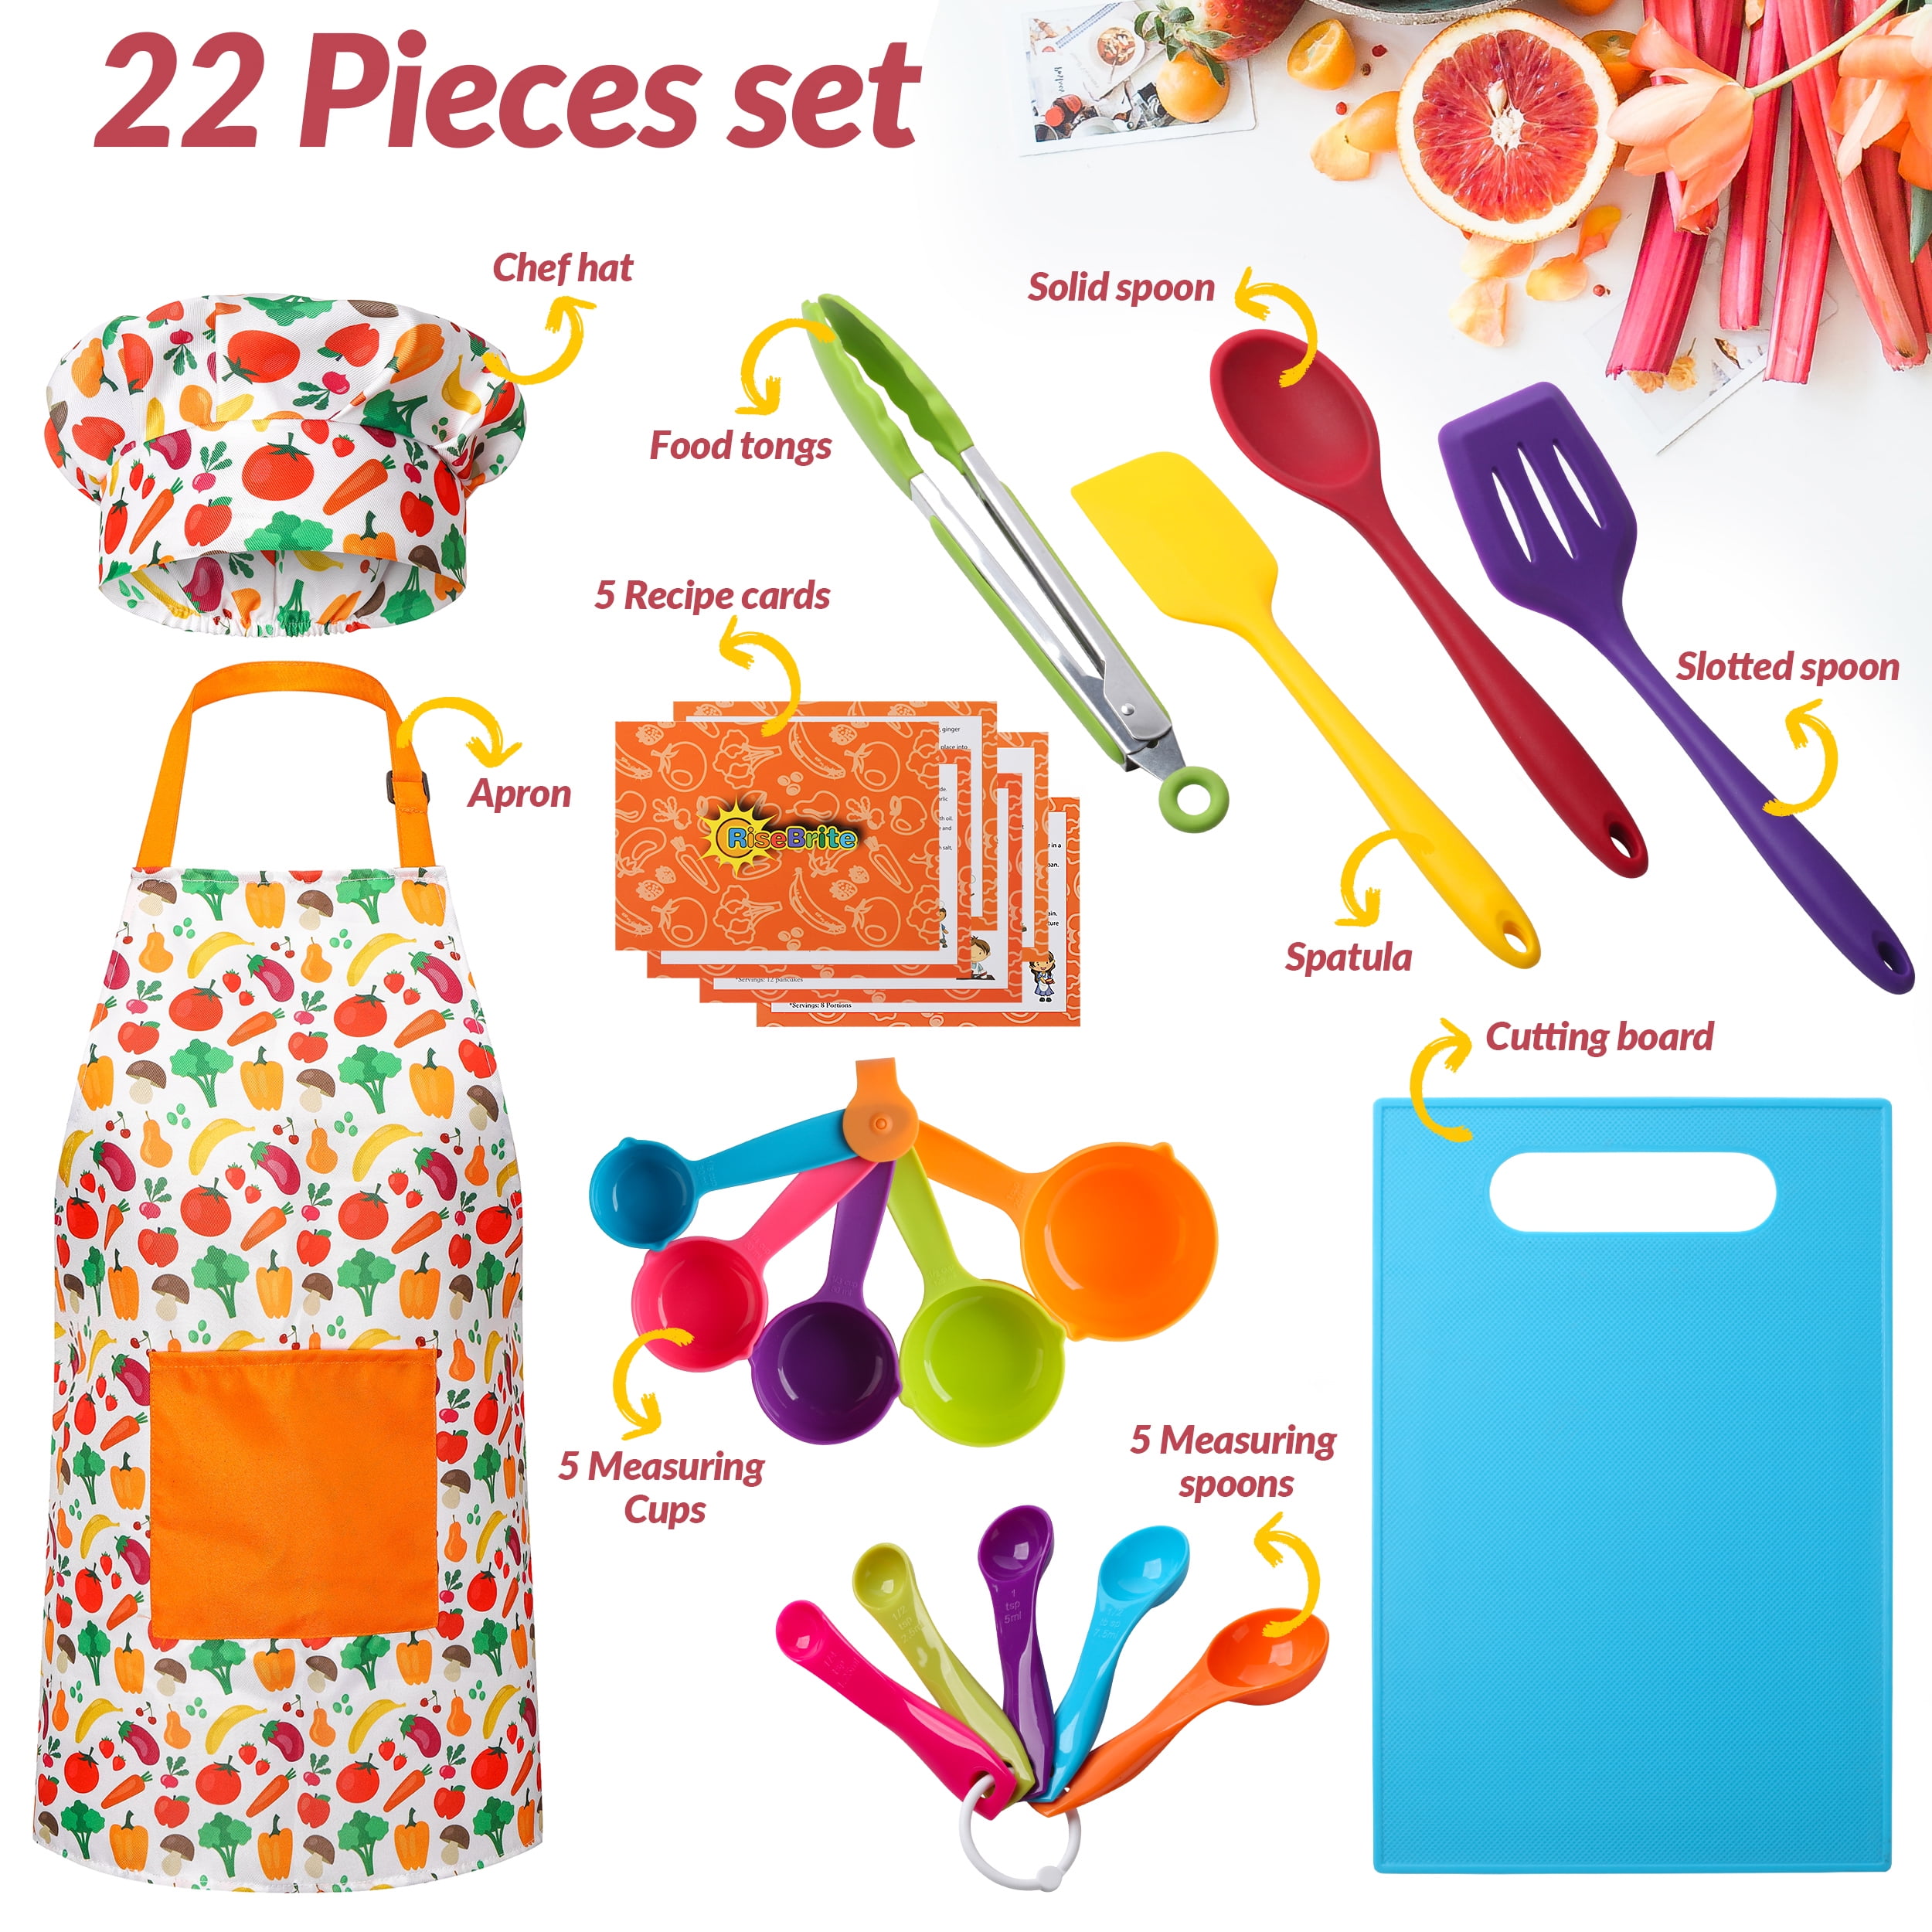 21 Must Have Supplies For Your Kids Baking Party - RiseBrite